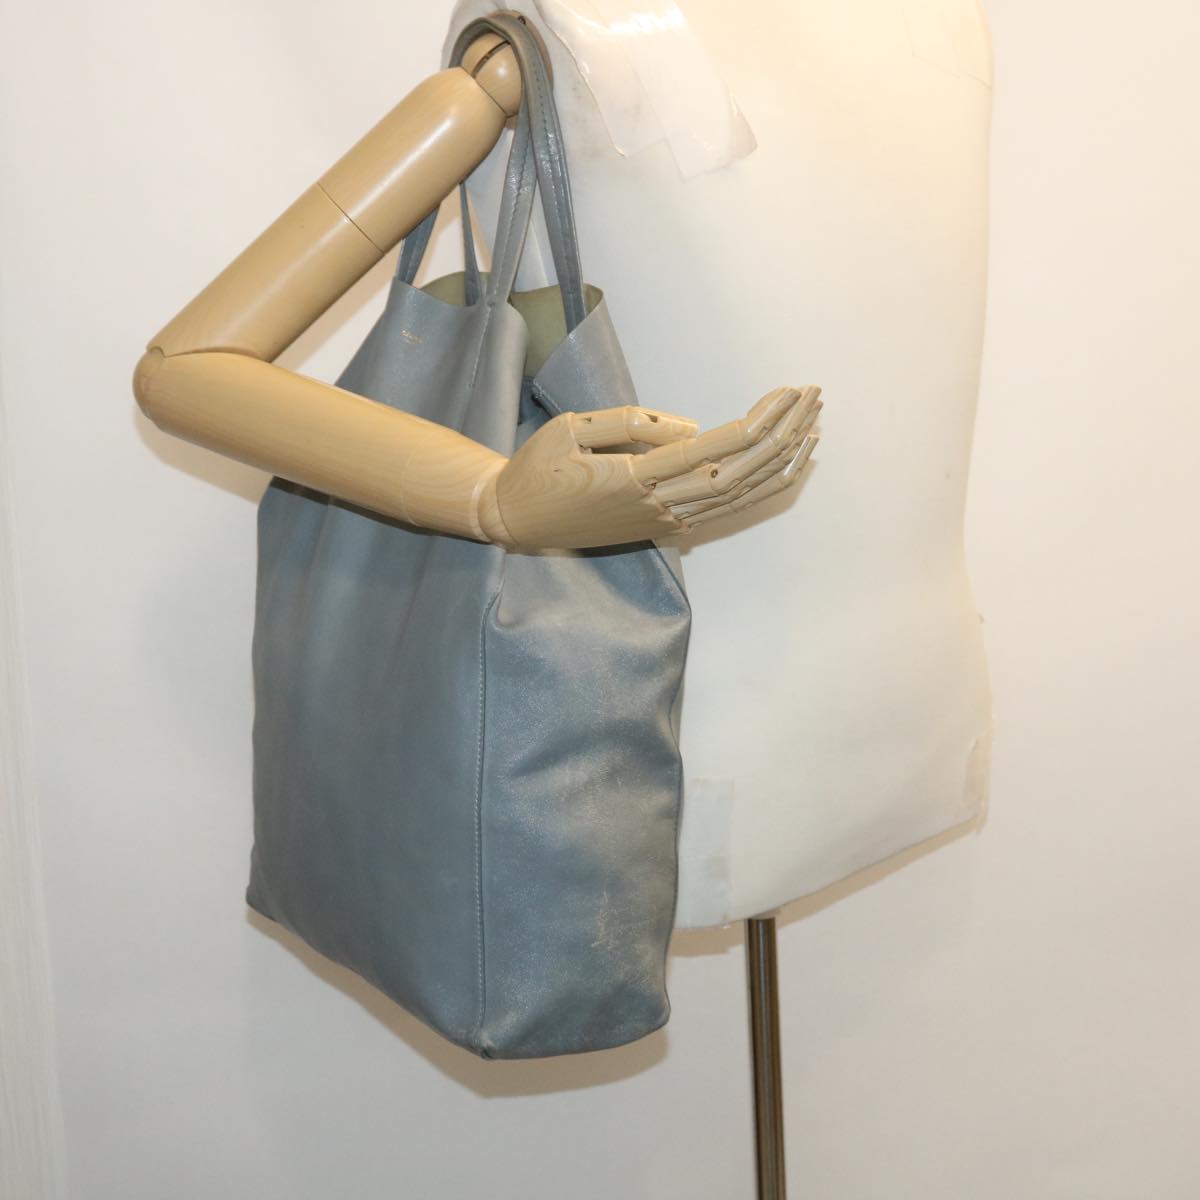 CELINE Tote Bag Leather Gray Auth am2387g